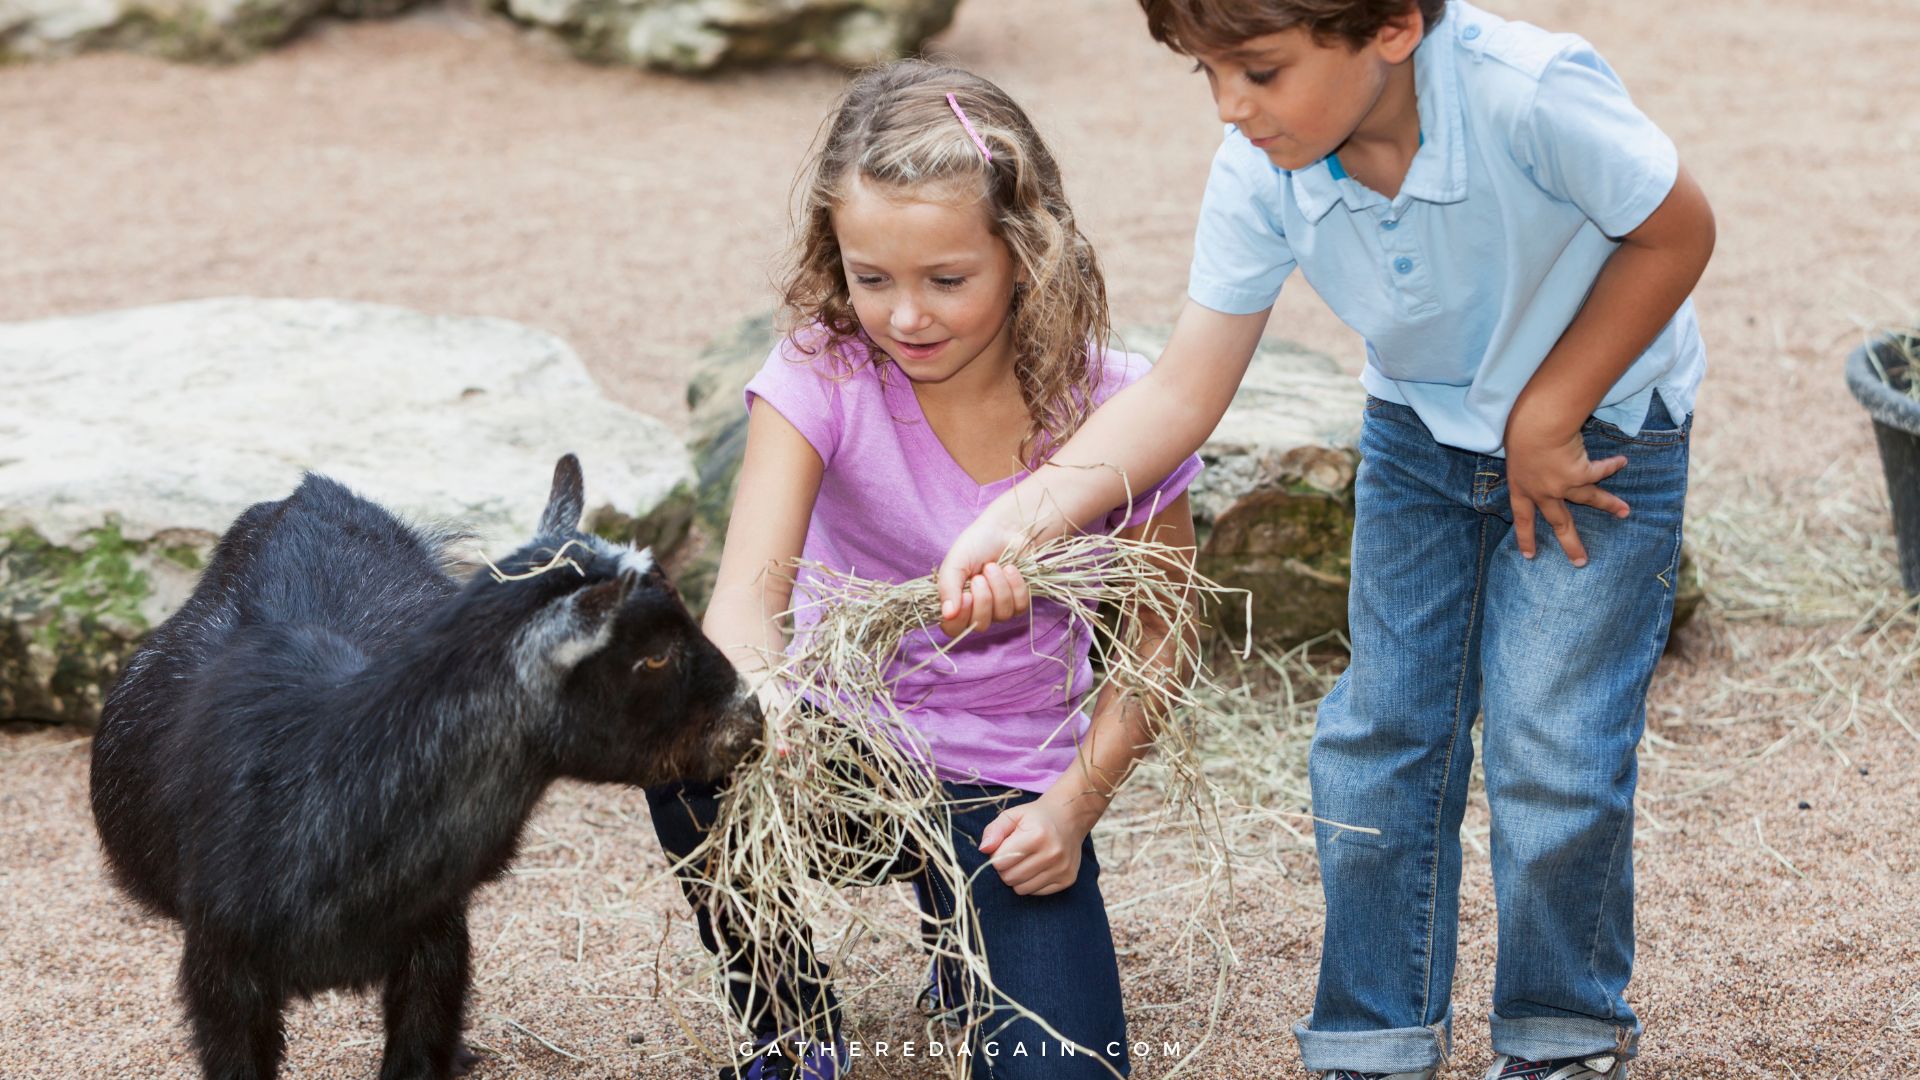 children feeding goats at a petting zoo day trip